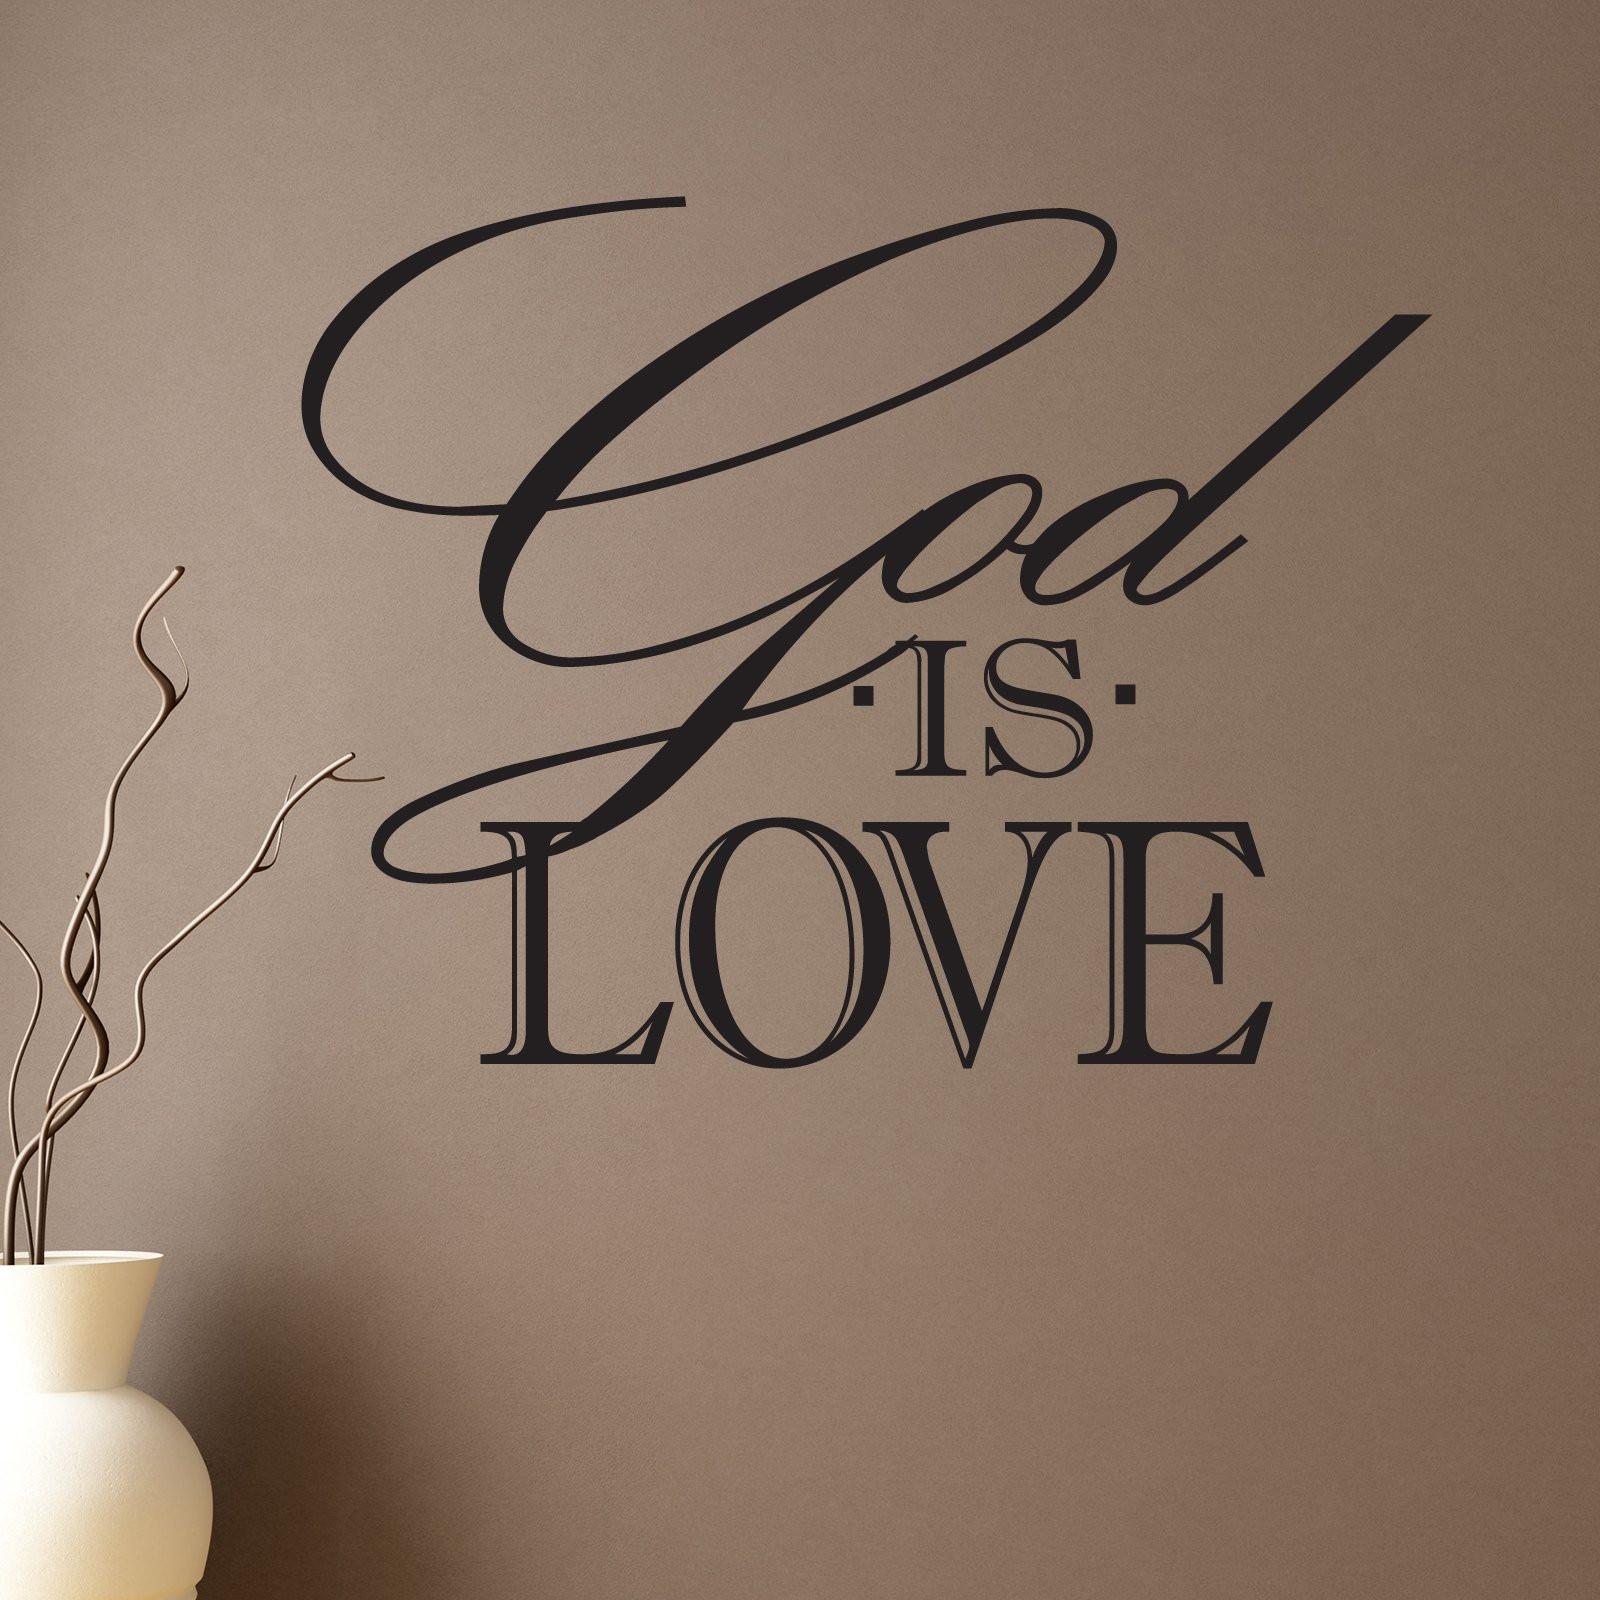 Religion Love Quotes
 God Is Love Religious Quote Wall Sticker Decal World